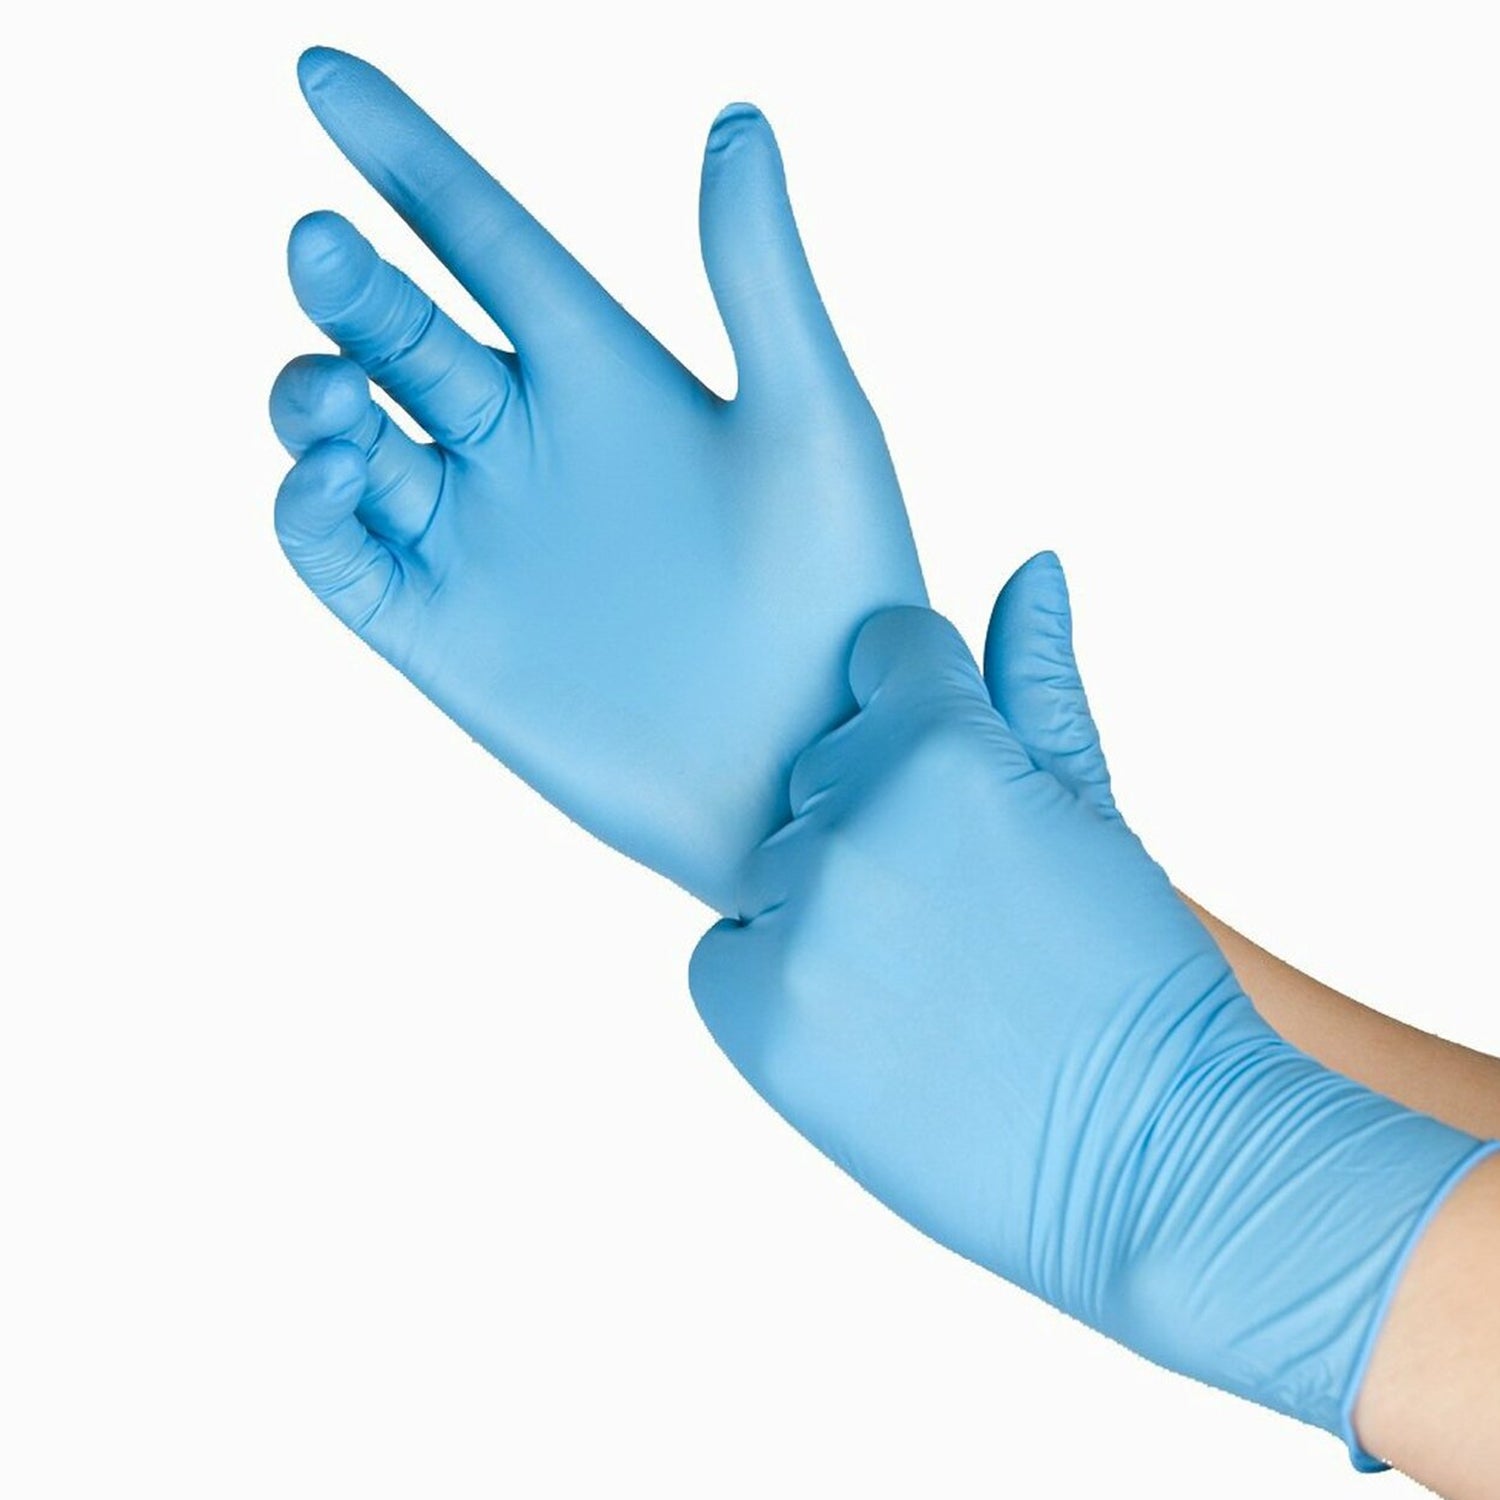 Premier AF Nitrile Examination Gloves | Sterile | Latex Free | XLarge | Pack of 50 Pairs | Short Expiry Date